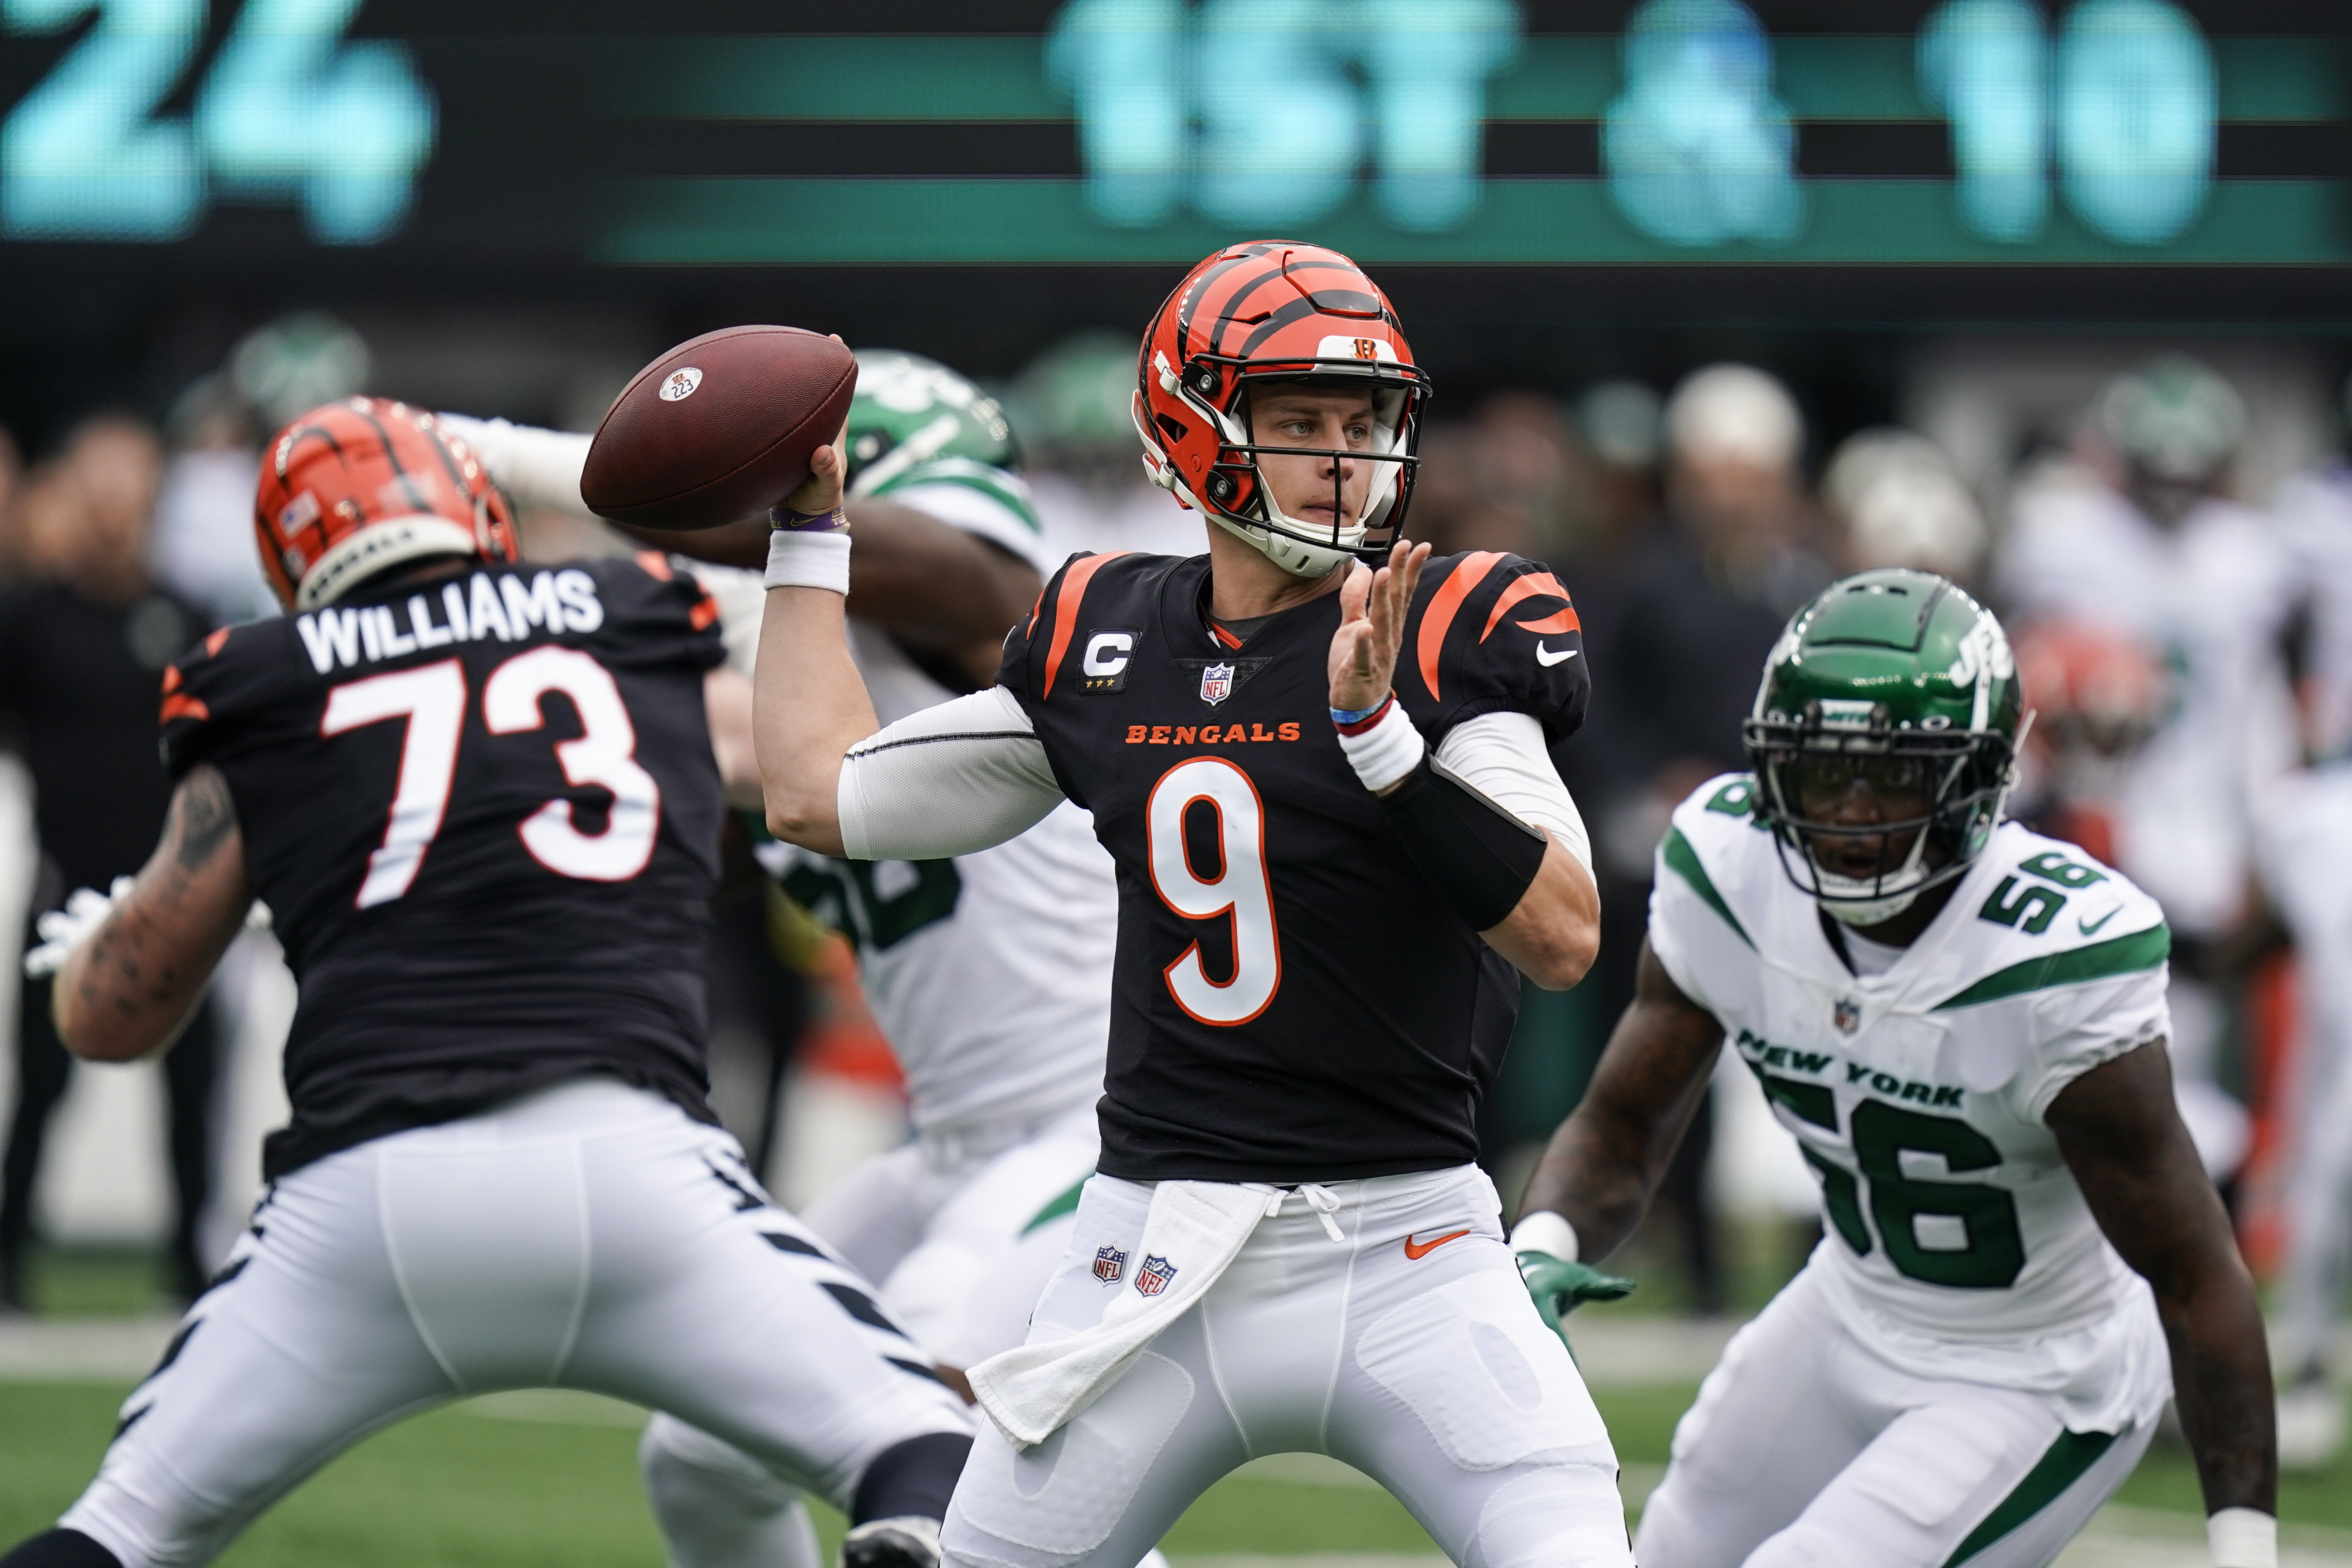 Bengals-Dolphins on Thursday night could be first Burrow-Tua showdown